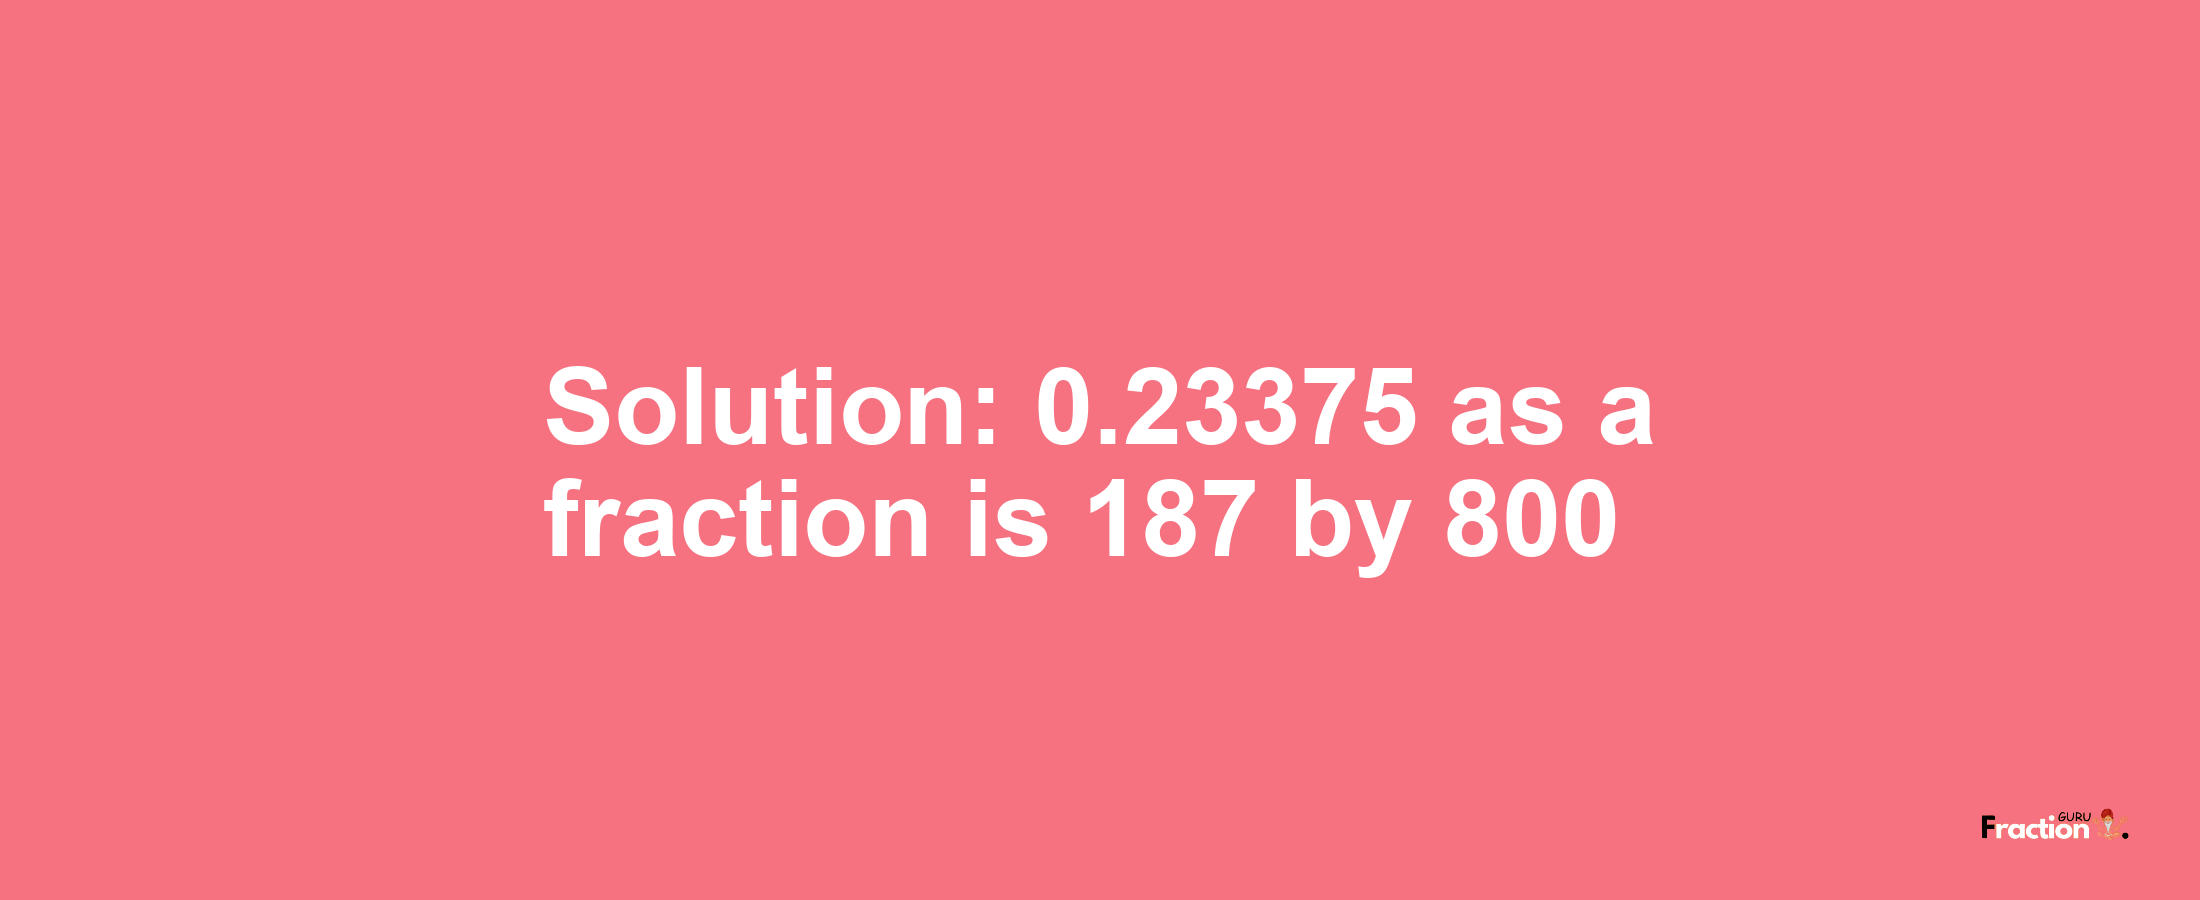 Solution:0.23375 as a fraction is 187/800